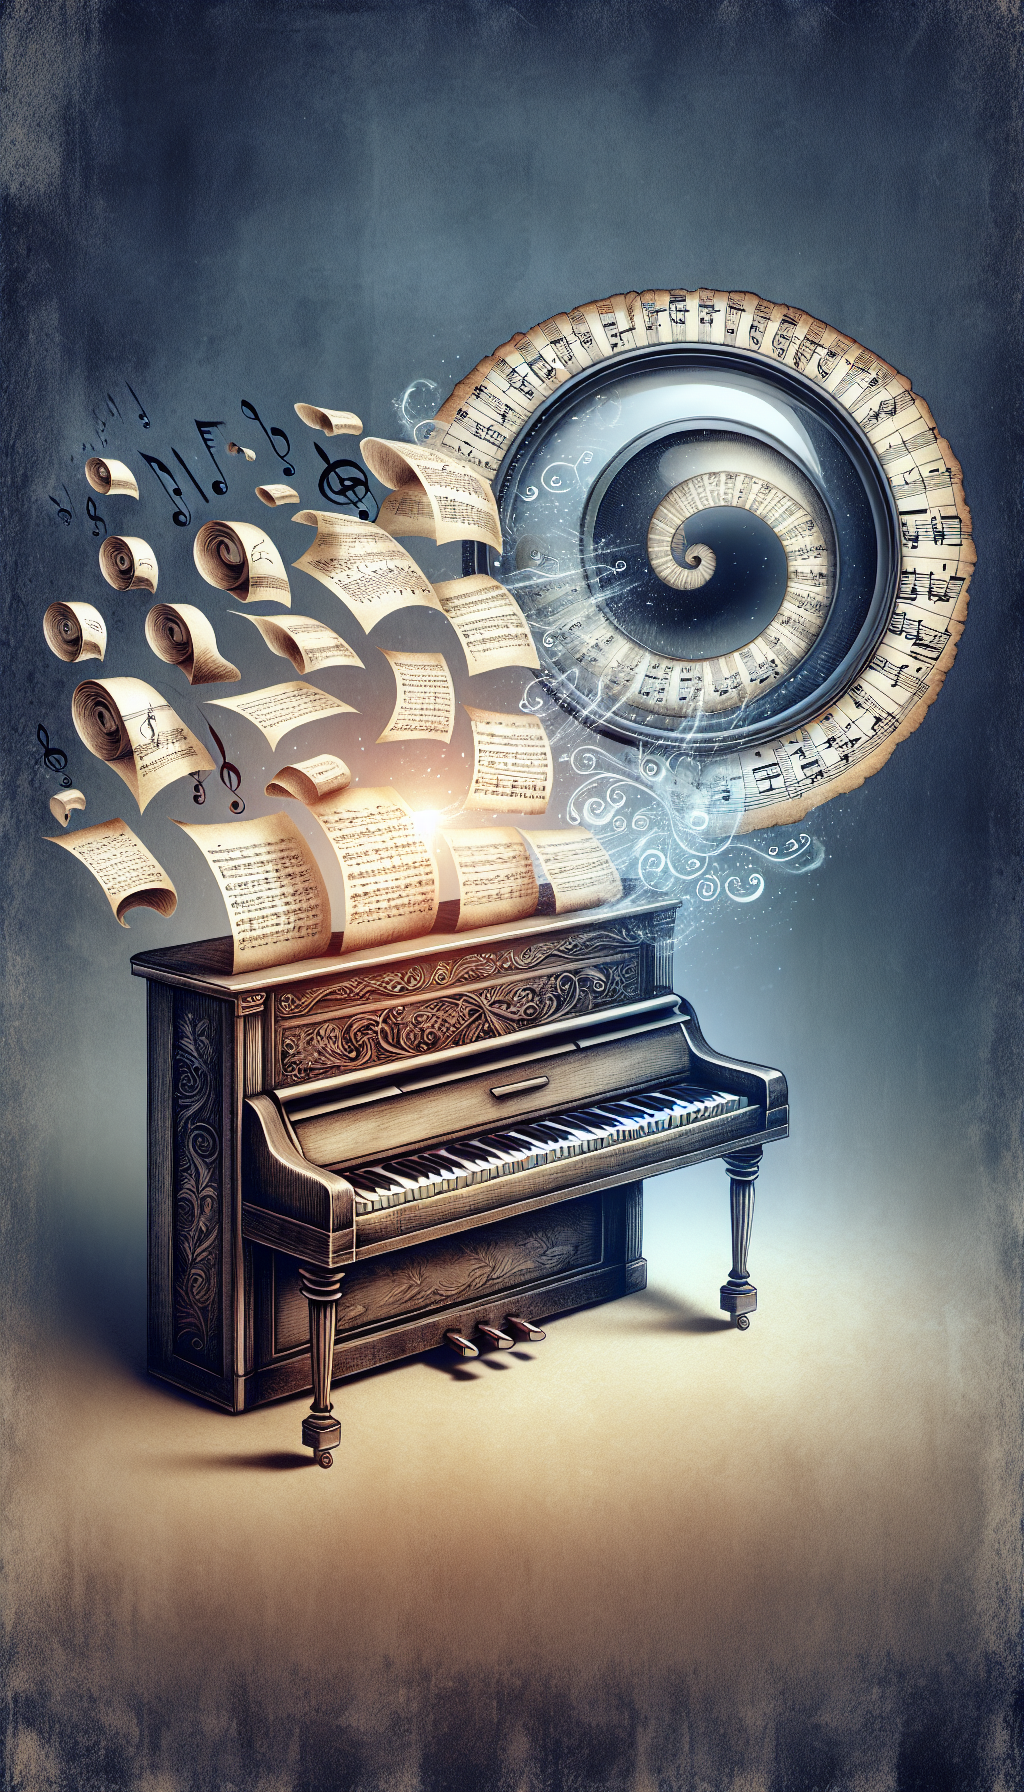 An ethereal illustration depicting a vintage piano with each of its keys morphing into scrolling historical scrolls and music sheets, hovered over by a magnifying glass that highlights unique engravings and manufacturer's marks. The piano exudes whimsical musical notes that transform into iconic landmarks and figures from different eras, symbolizing the evolution and identification of its antique lineage.